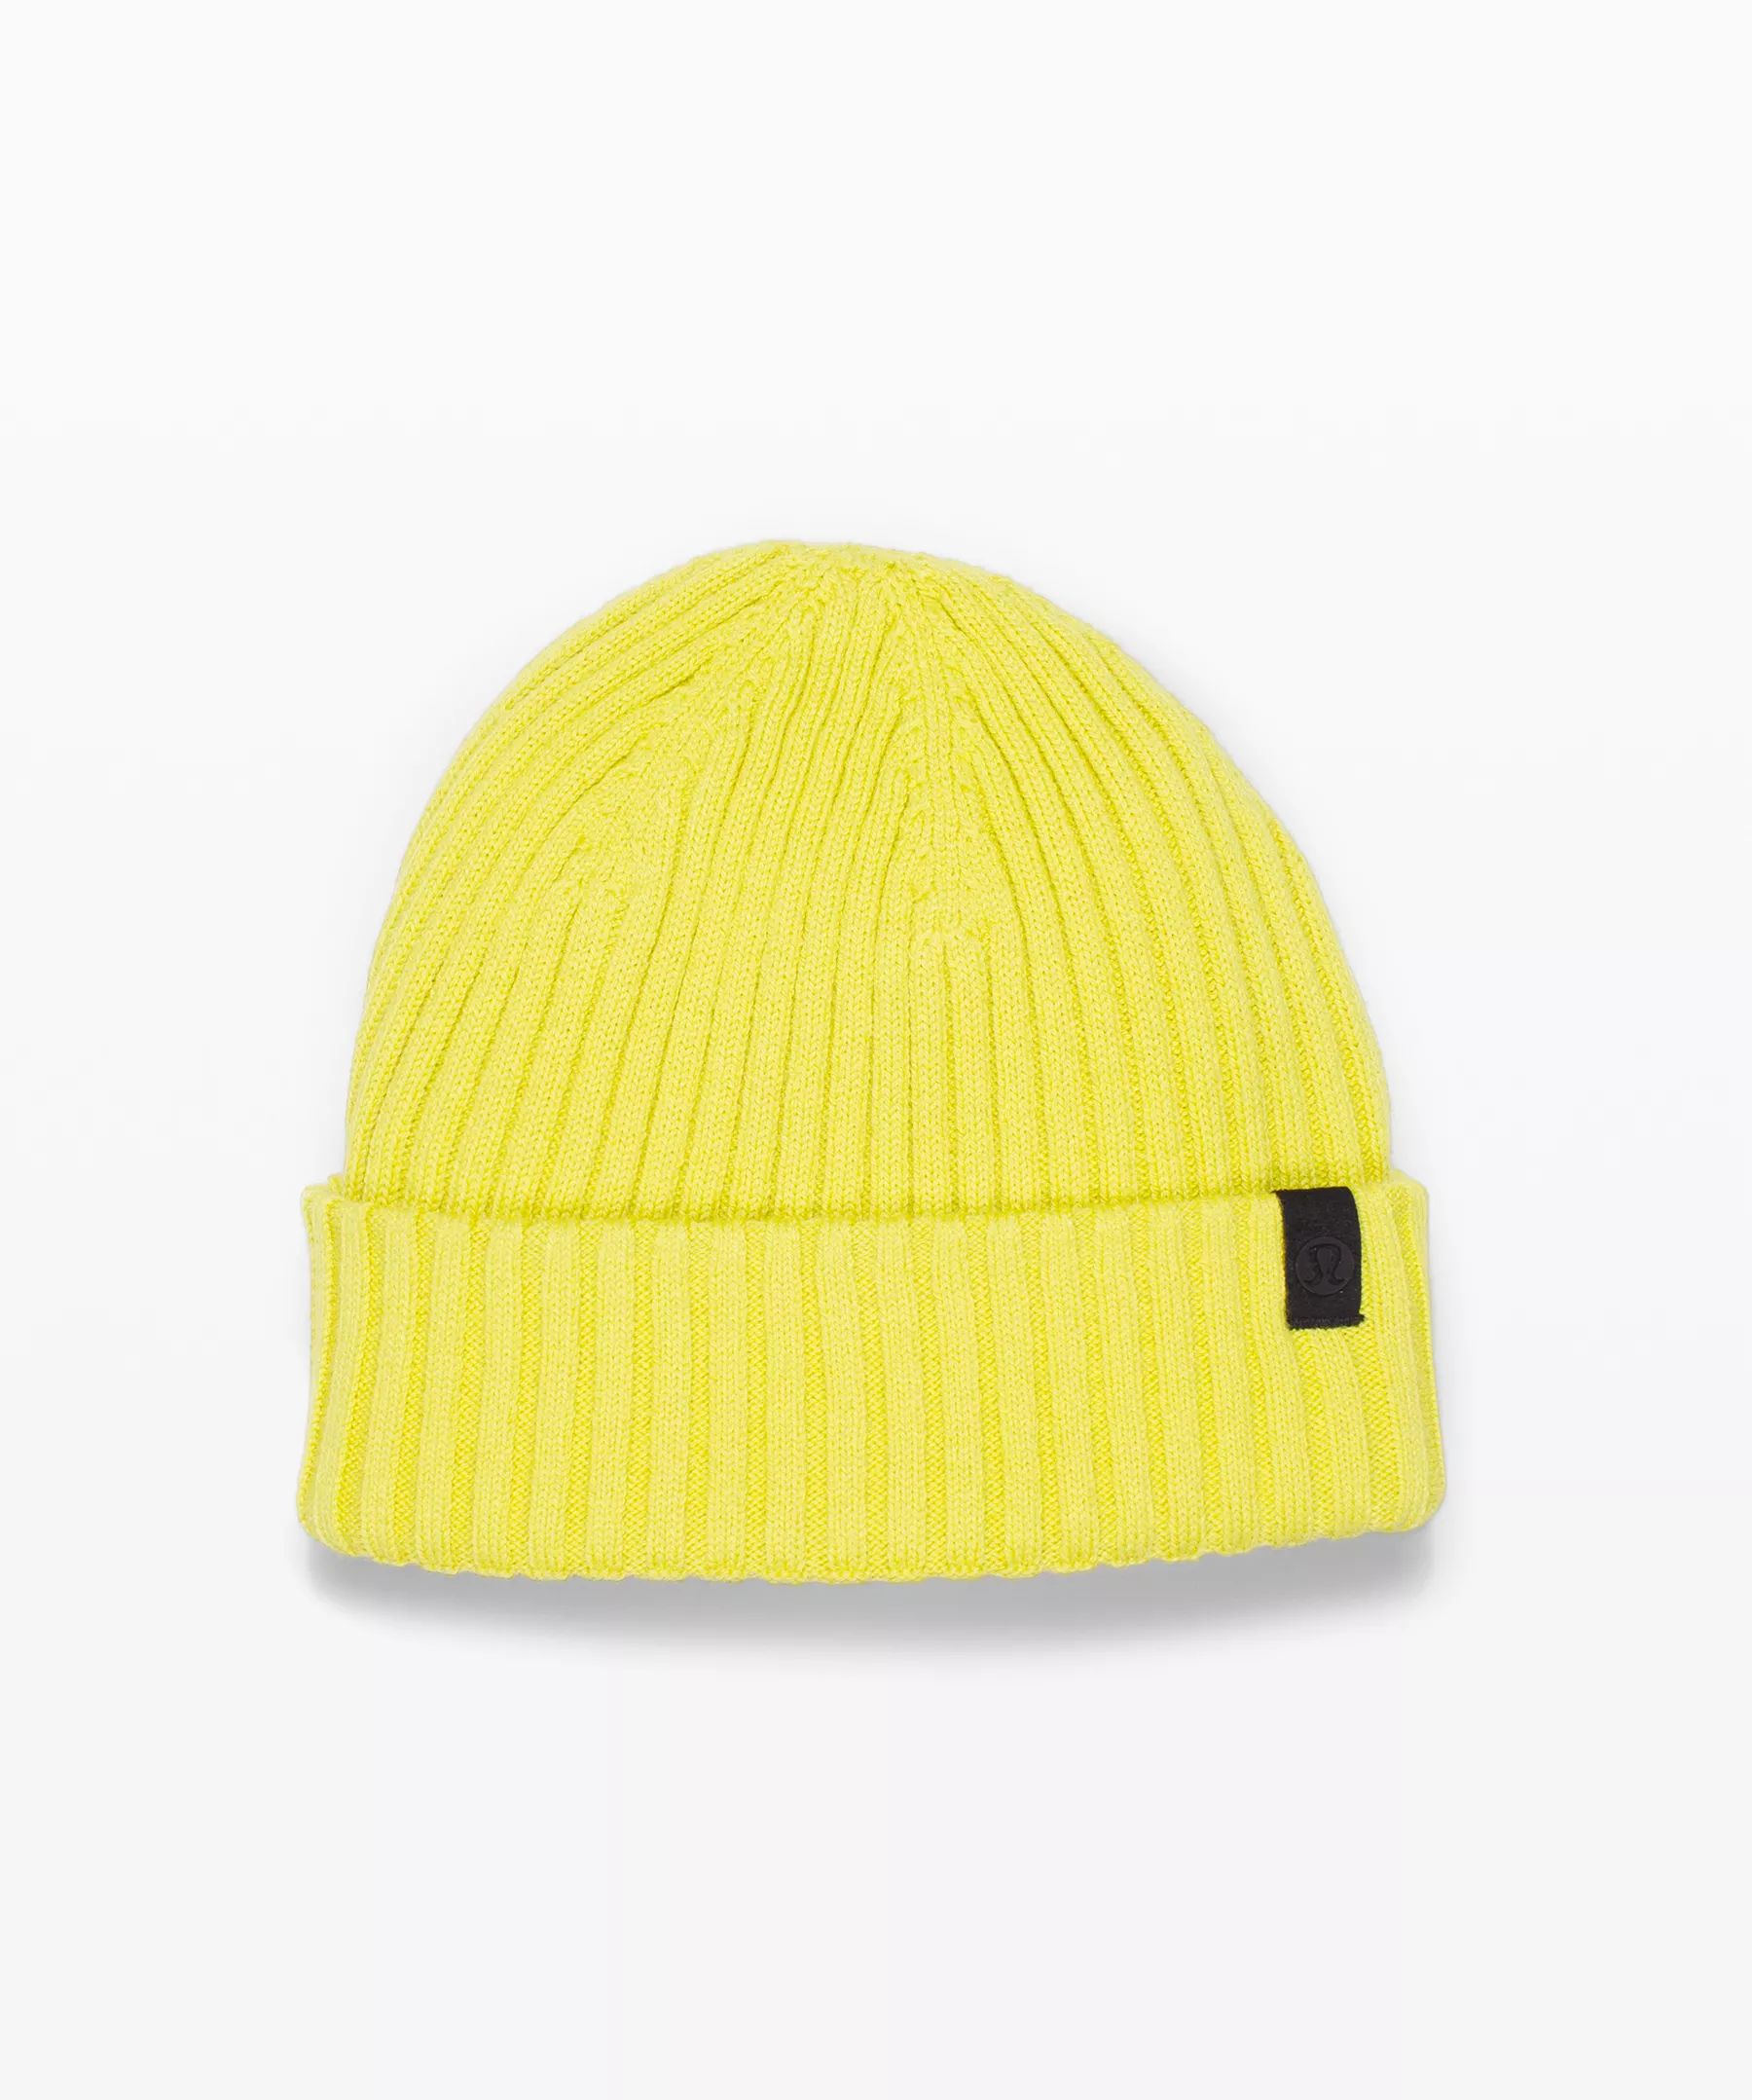 From the Top Beanie | Lululemon (US)